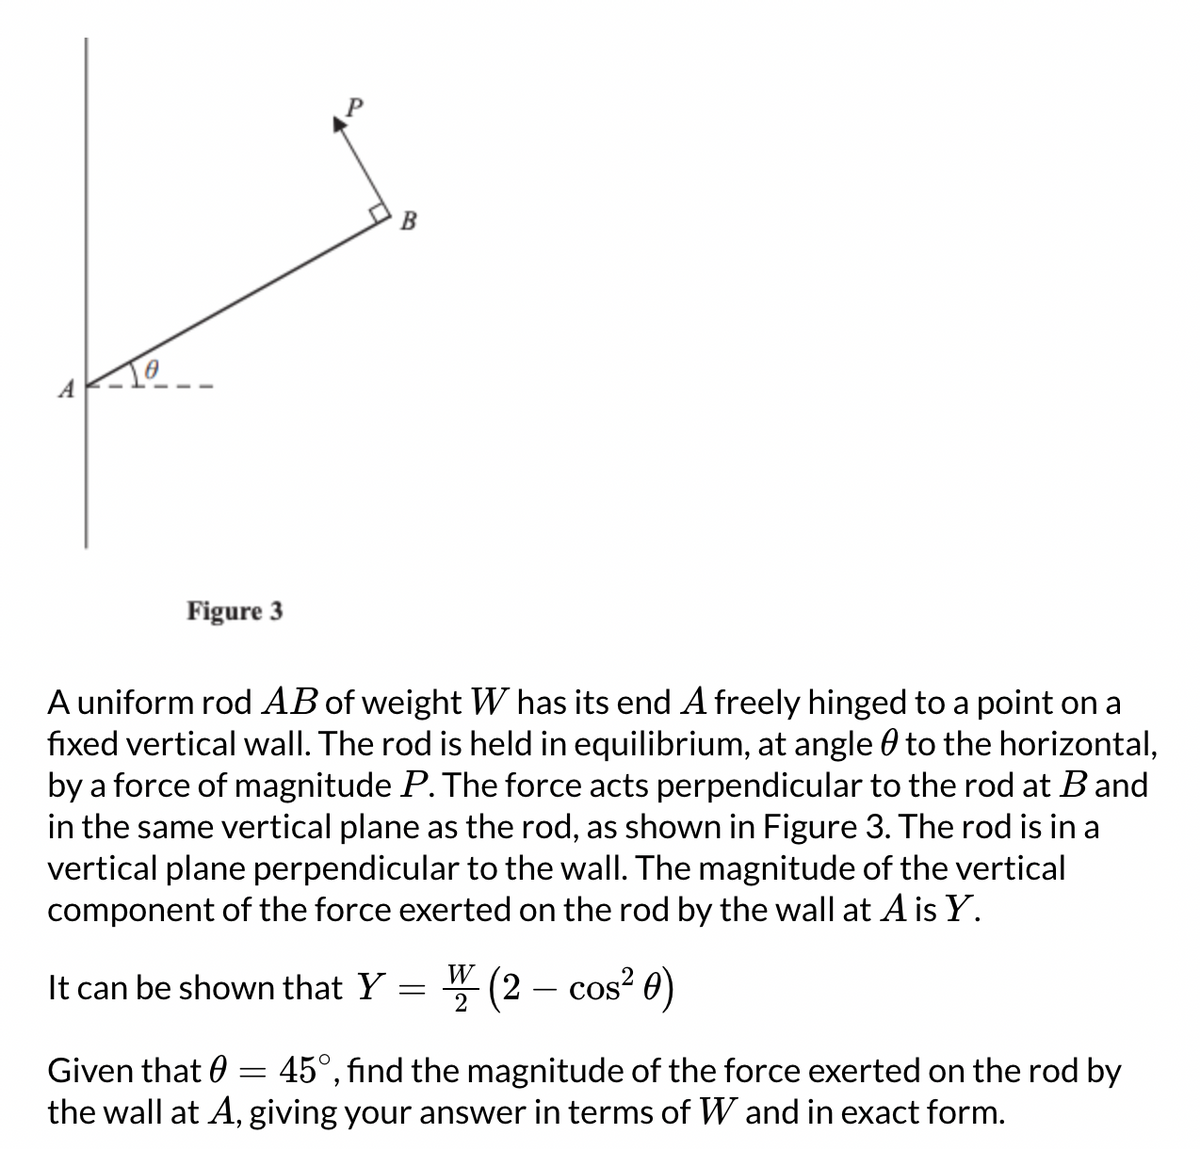 Figure 3
B
A uniform rod AB of weight W has its end A freely hinged to a point on a
fixed vertical wall. The rod is held in equilibrium, at angle to the horizontal,
by a force of magnitude P. The force acts perpendicular to the rod at B and
in the same vertical plane as the rod, as shown in Figure 3. The rod is in a
vertical plane perpendicular to the wall. The magnitude of the vertical
component of the force exerted on the rod by the wall at A is Y.
It can be shown that Y
=
W
2
(2 - cos² 0)
Given that = 45°, find the magnitude of the force exerted on the rod by
the wall at A, giving your answer in terms of W and in exact form.